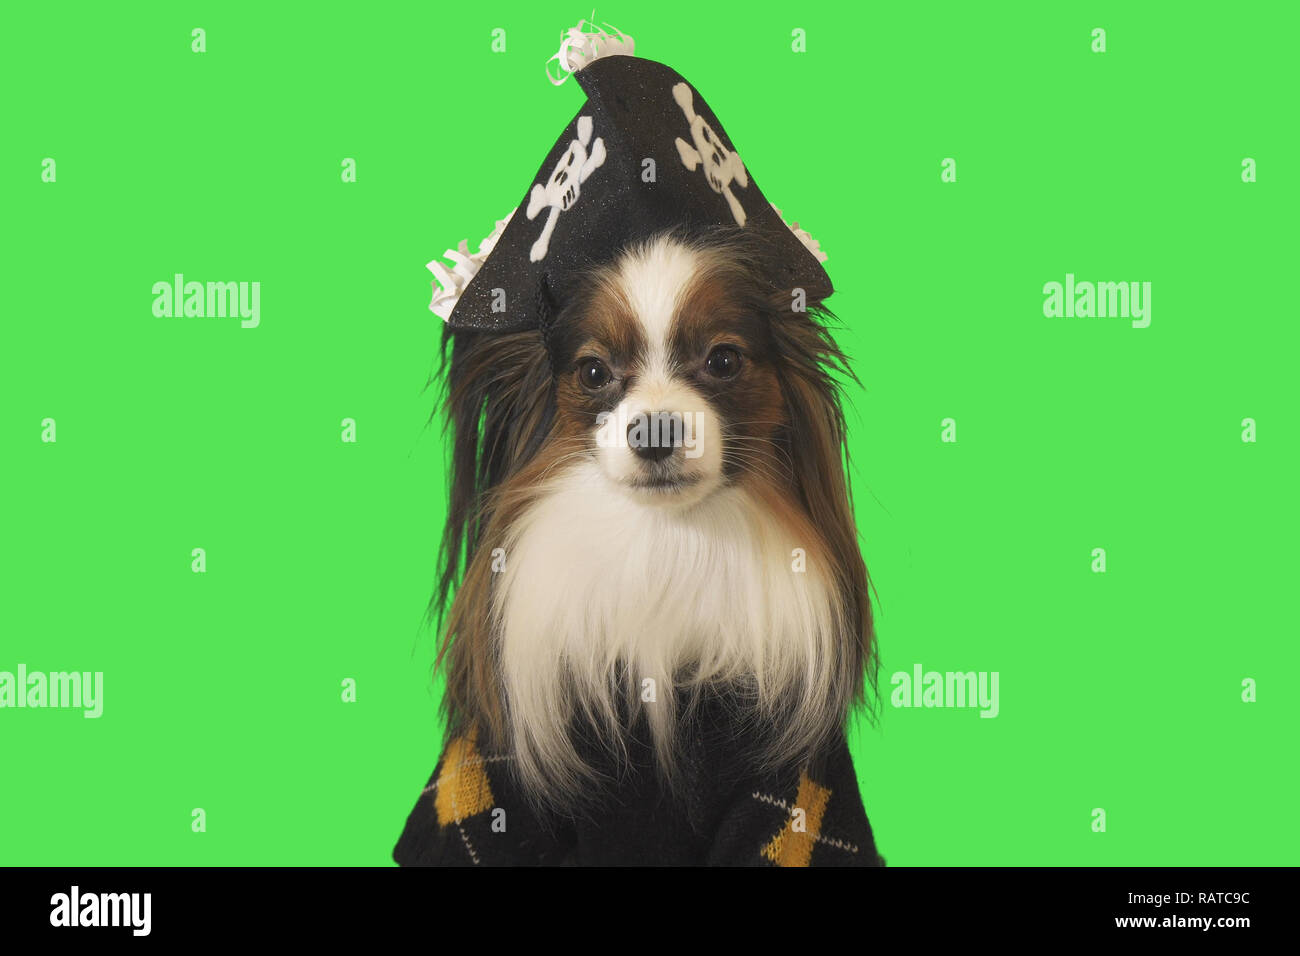 Beautiful dog Papillon in pirate costume on green background Stock Photo